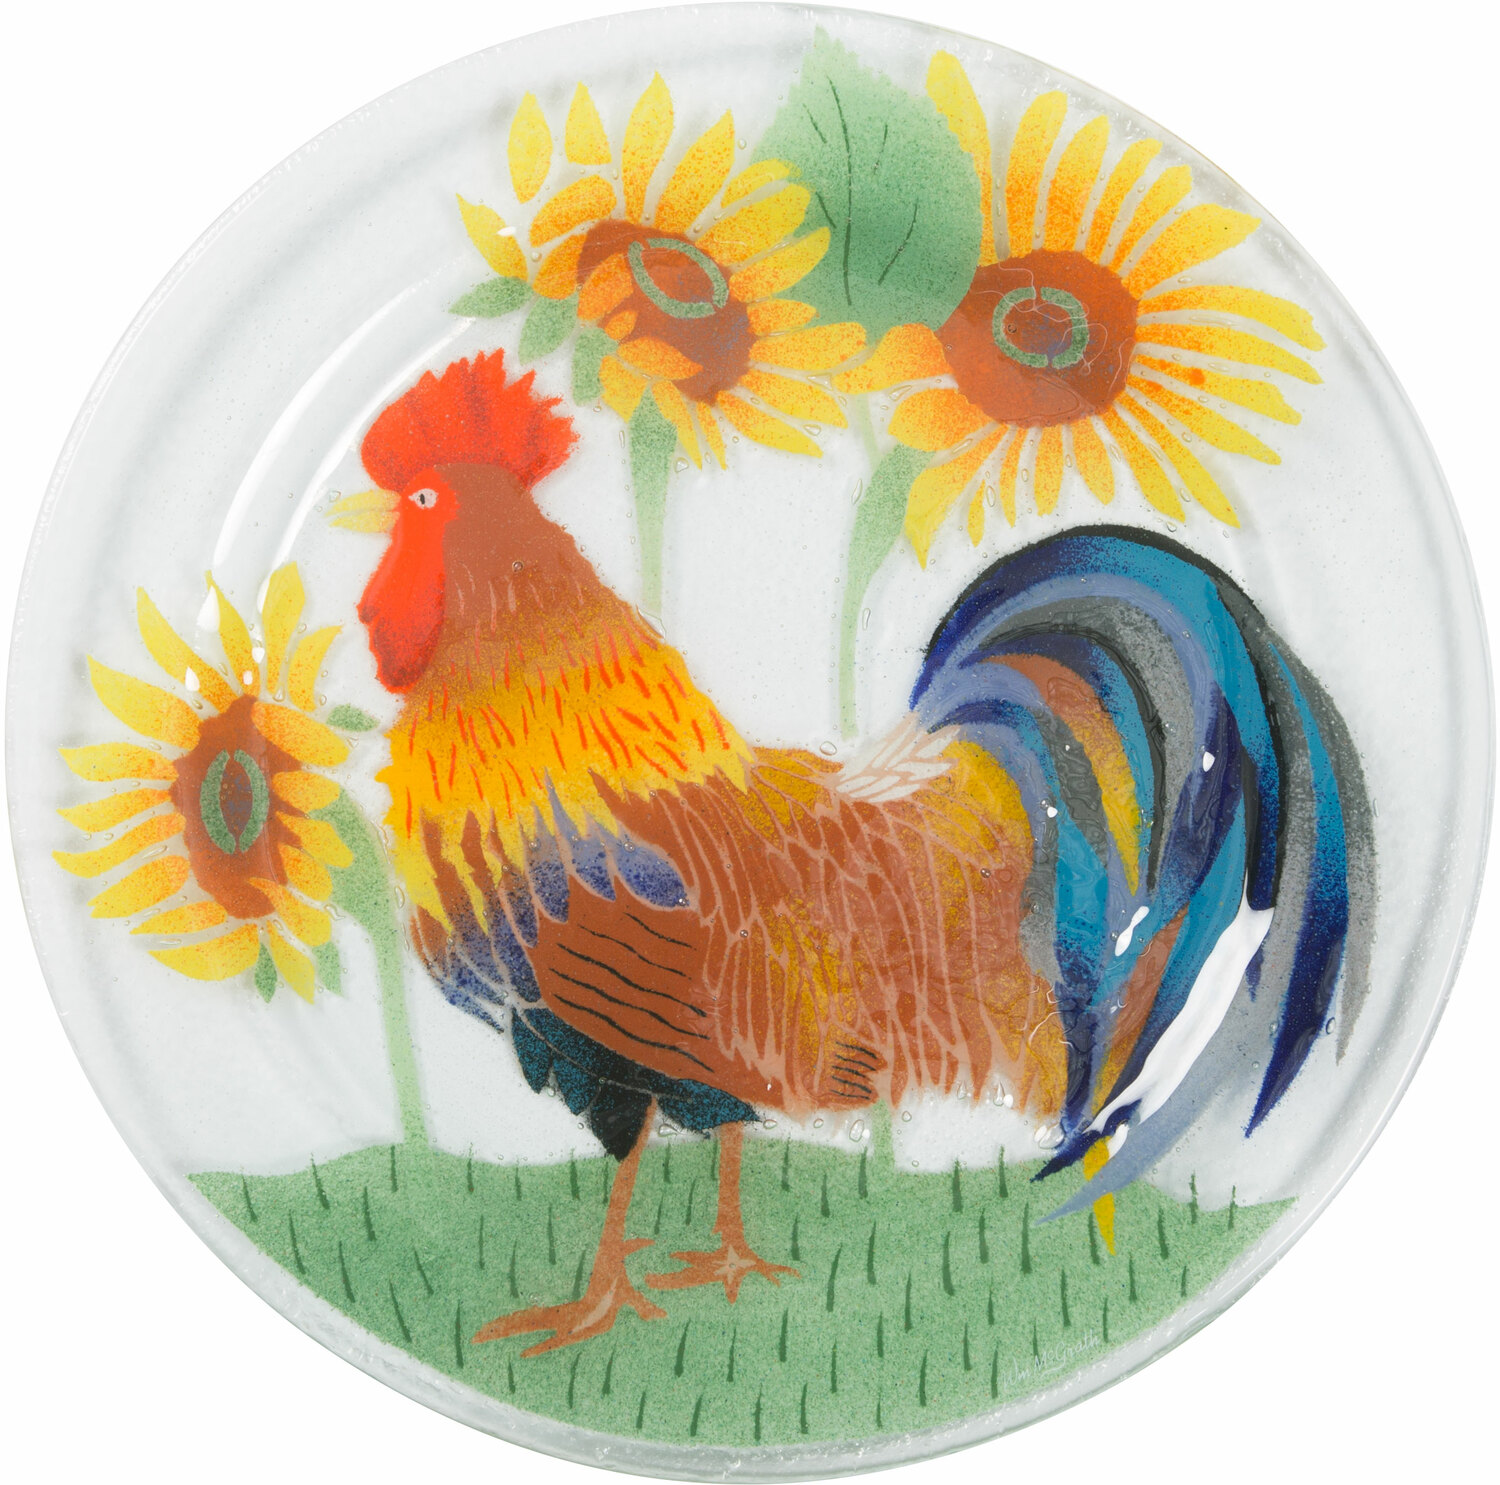 Country Rooster by Fusion Art Glass - Country Rooster - 11" Round Plate